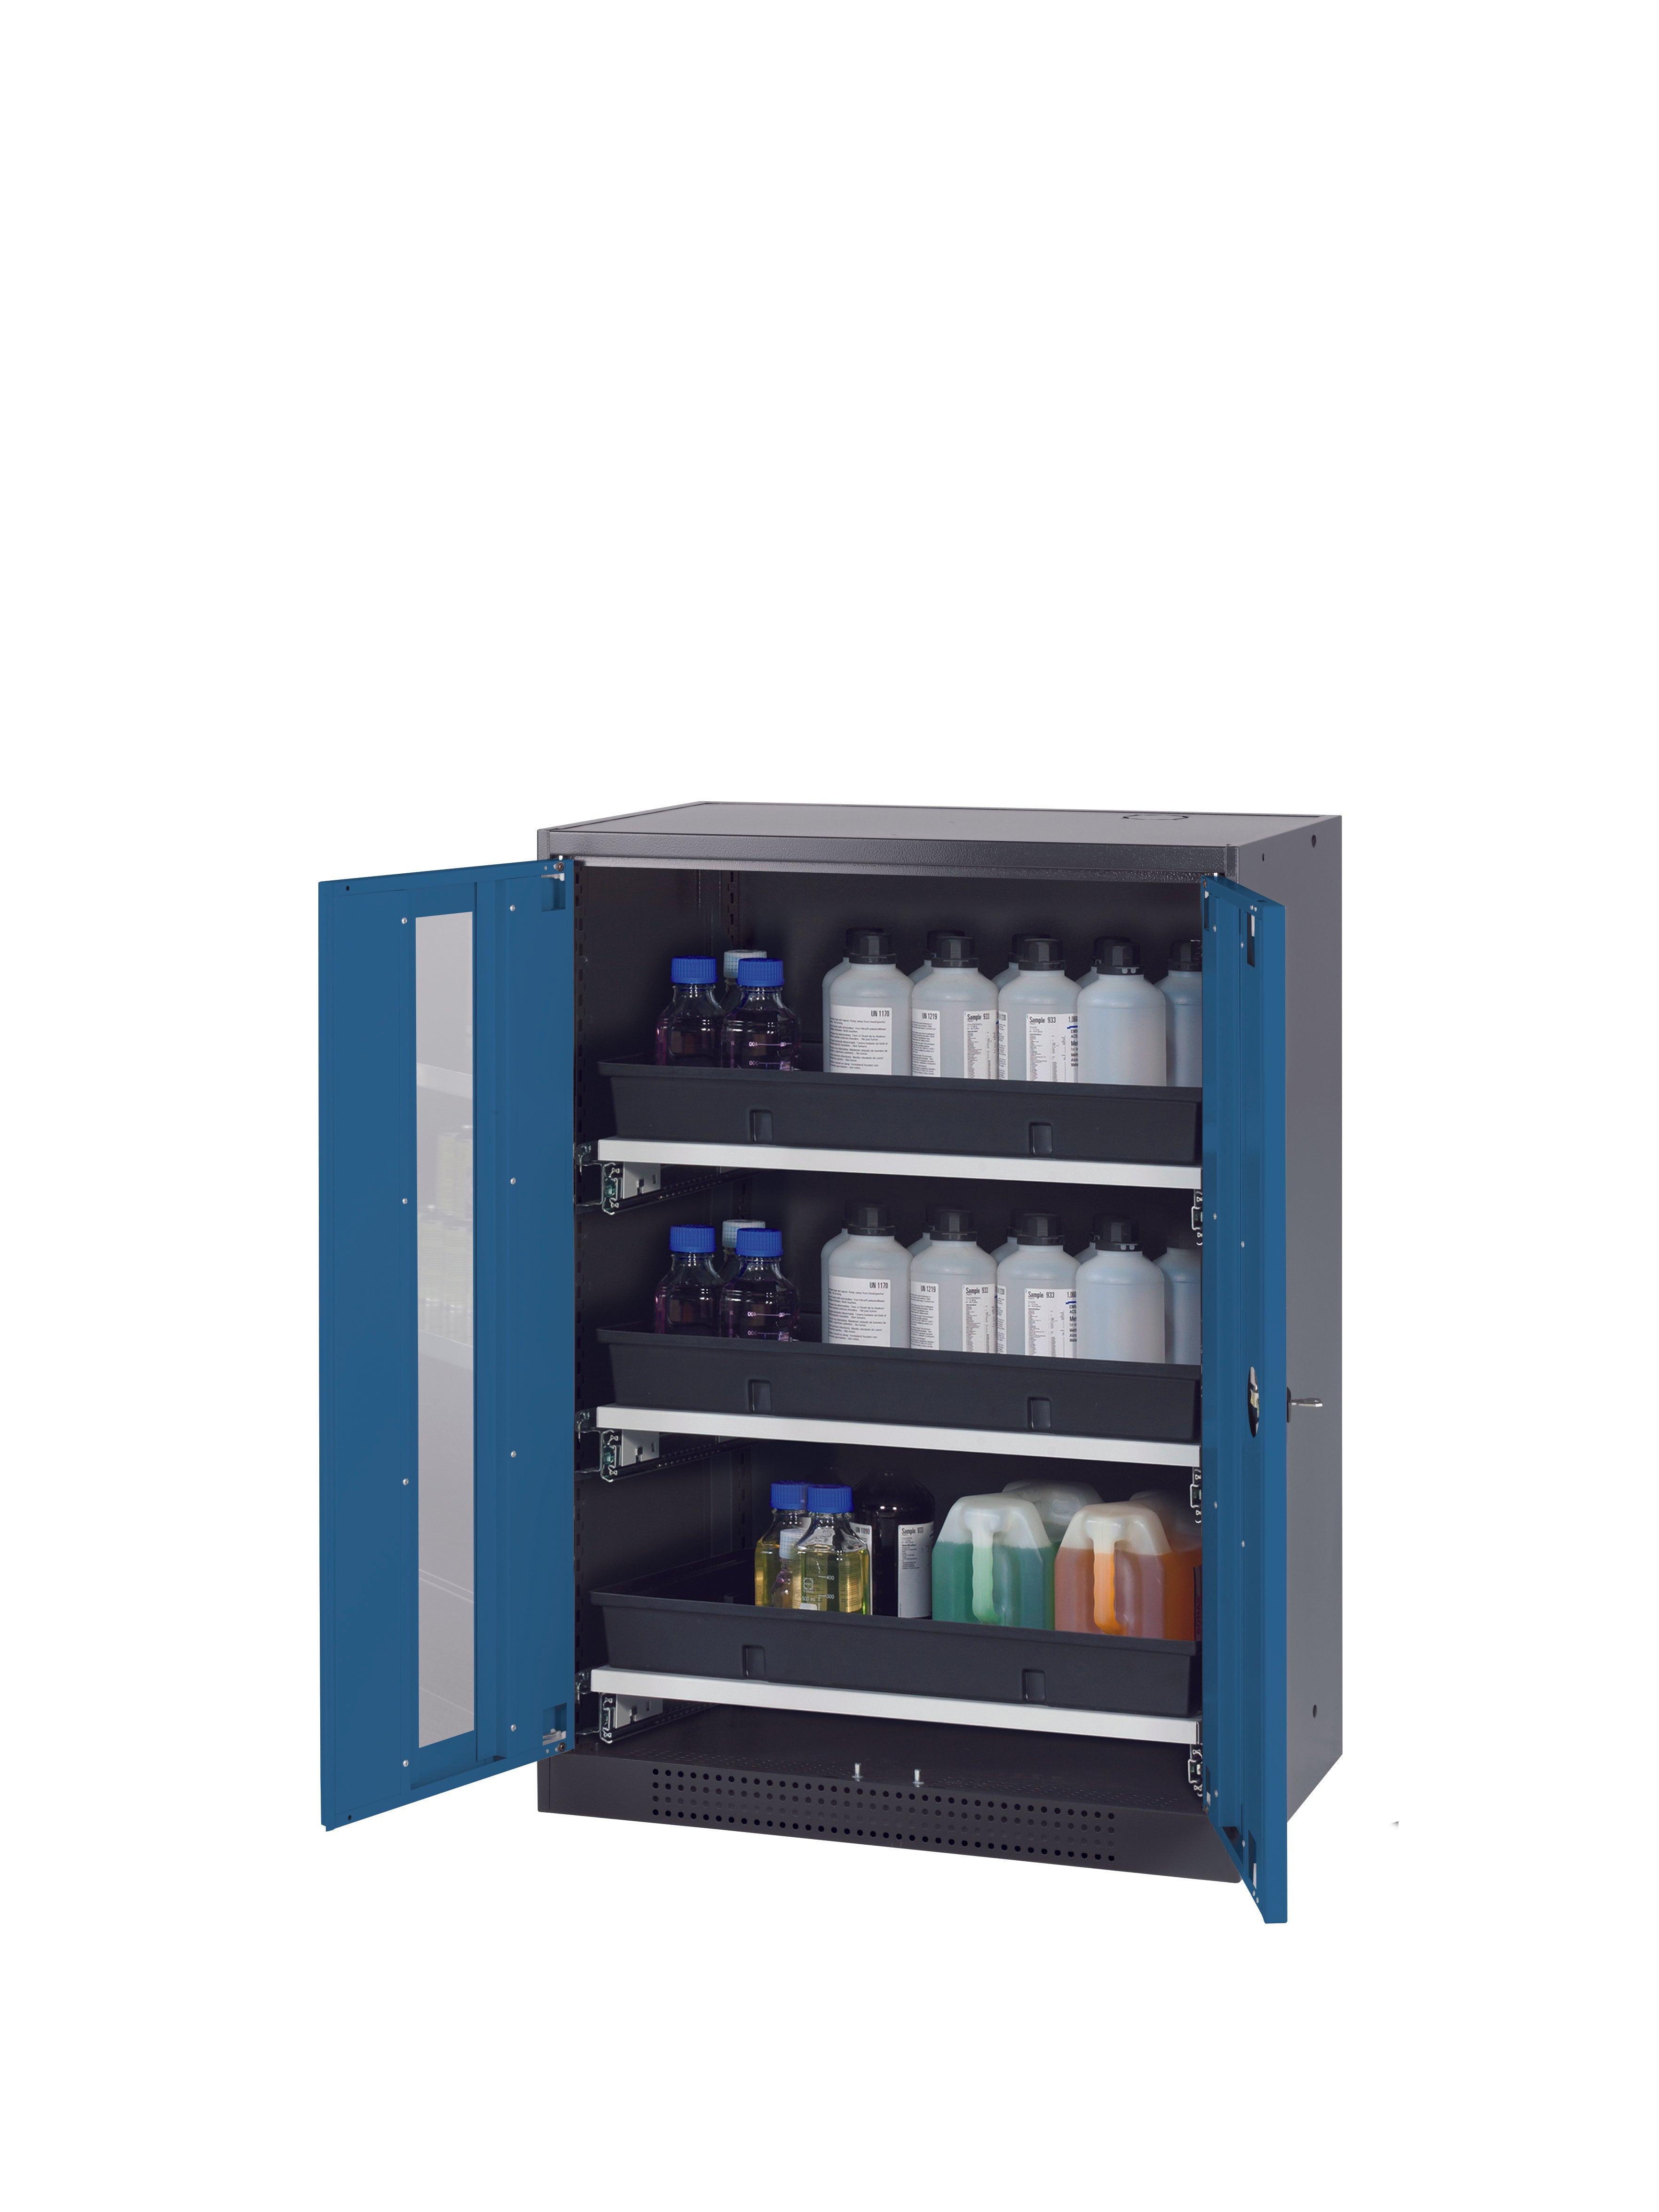 Chemical cabinet CS-CLASSIC-G model CS.110.081.WDFW in gentian blue RAL 5010 with 3x AbZ pull-out shelves (sheet steel/polypropylene)